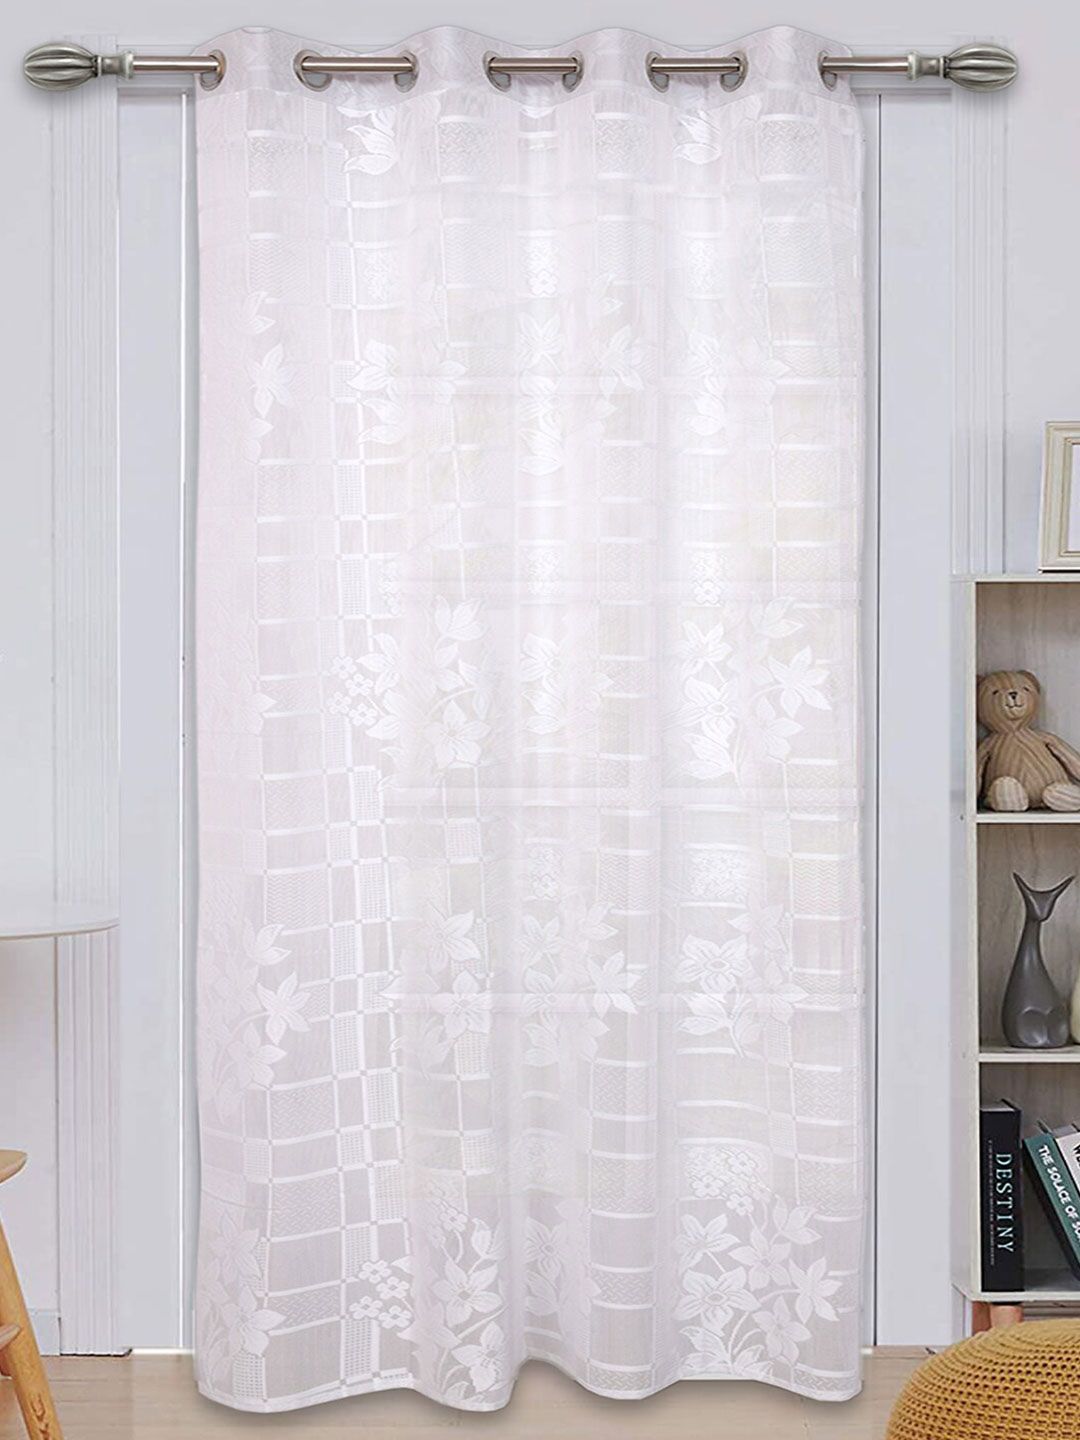 Kuber Industries White Floral Door Curtain Price in India